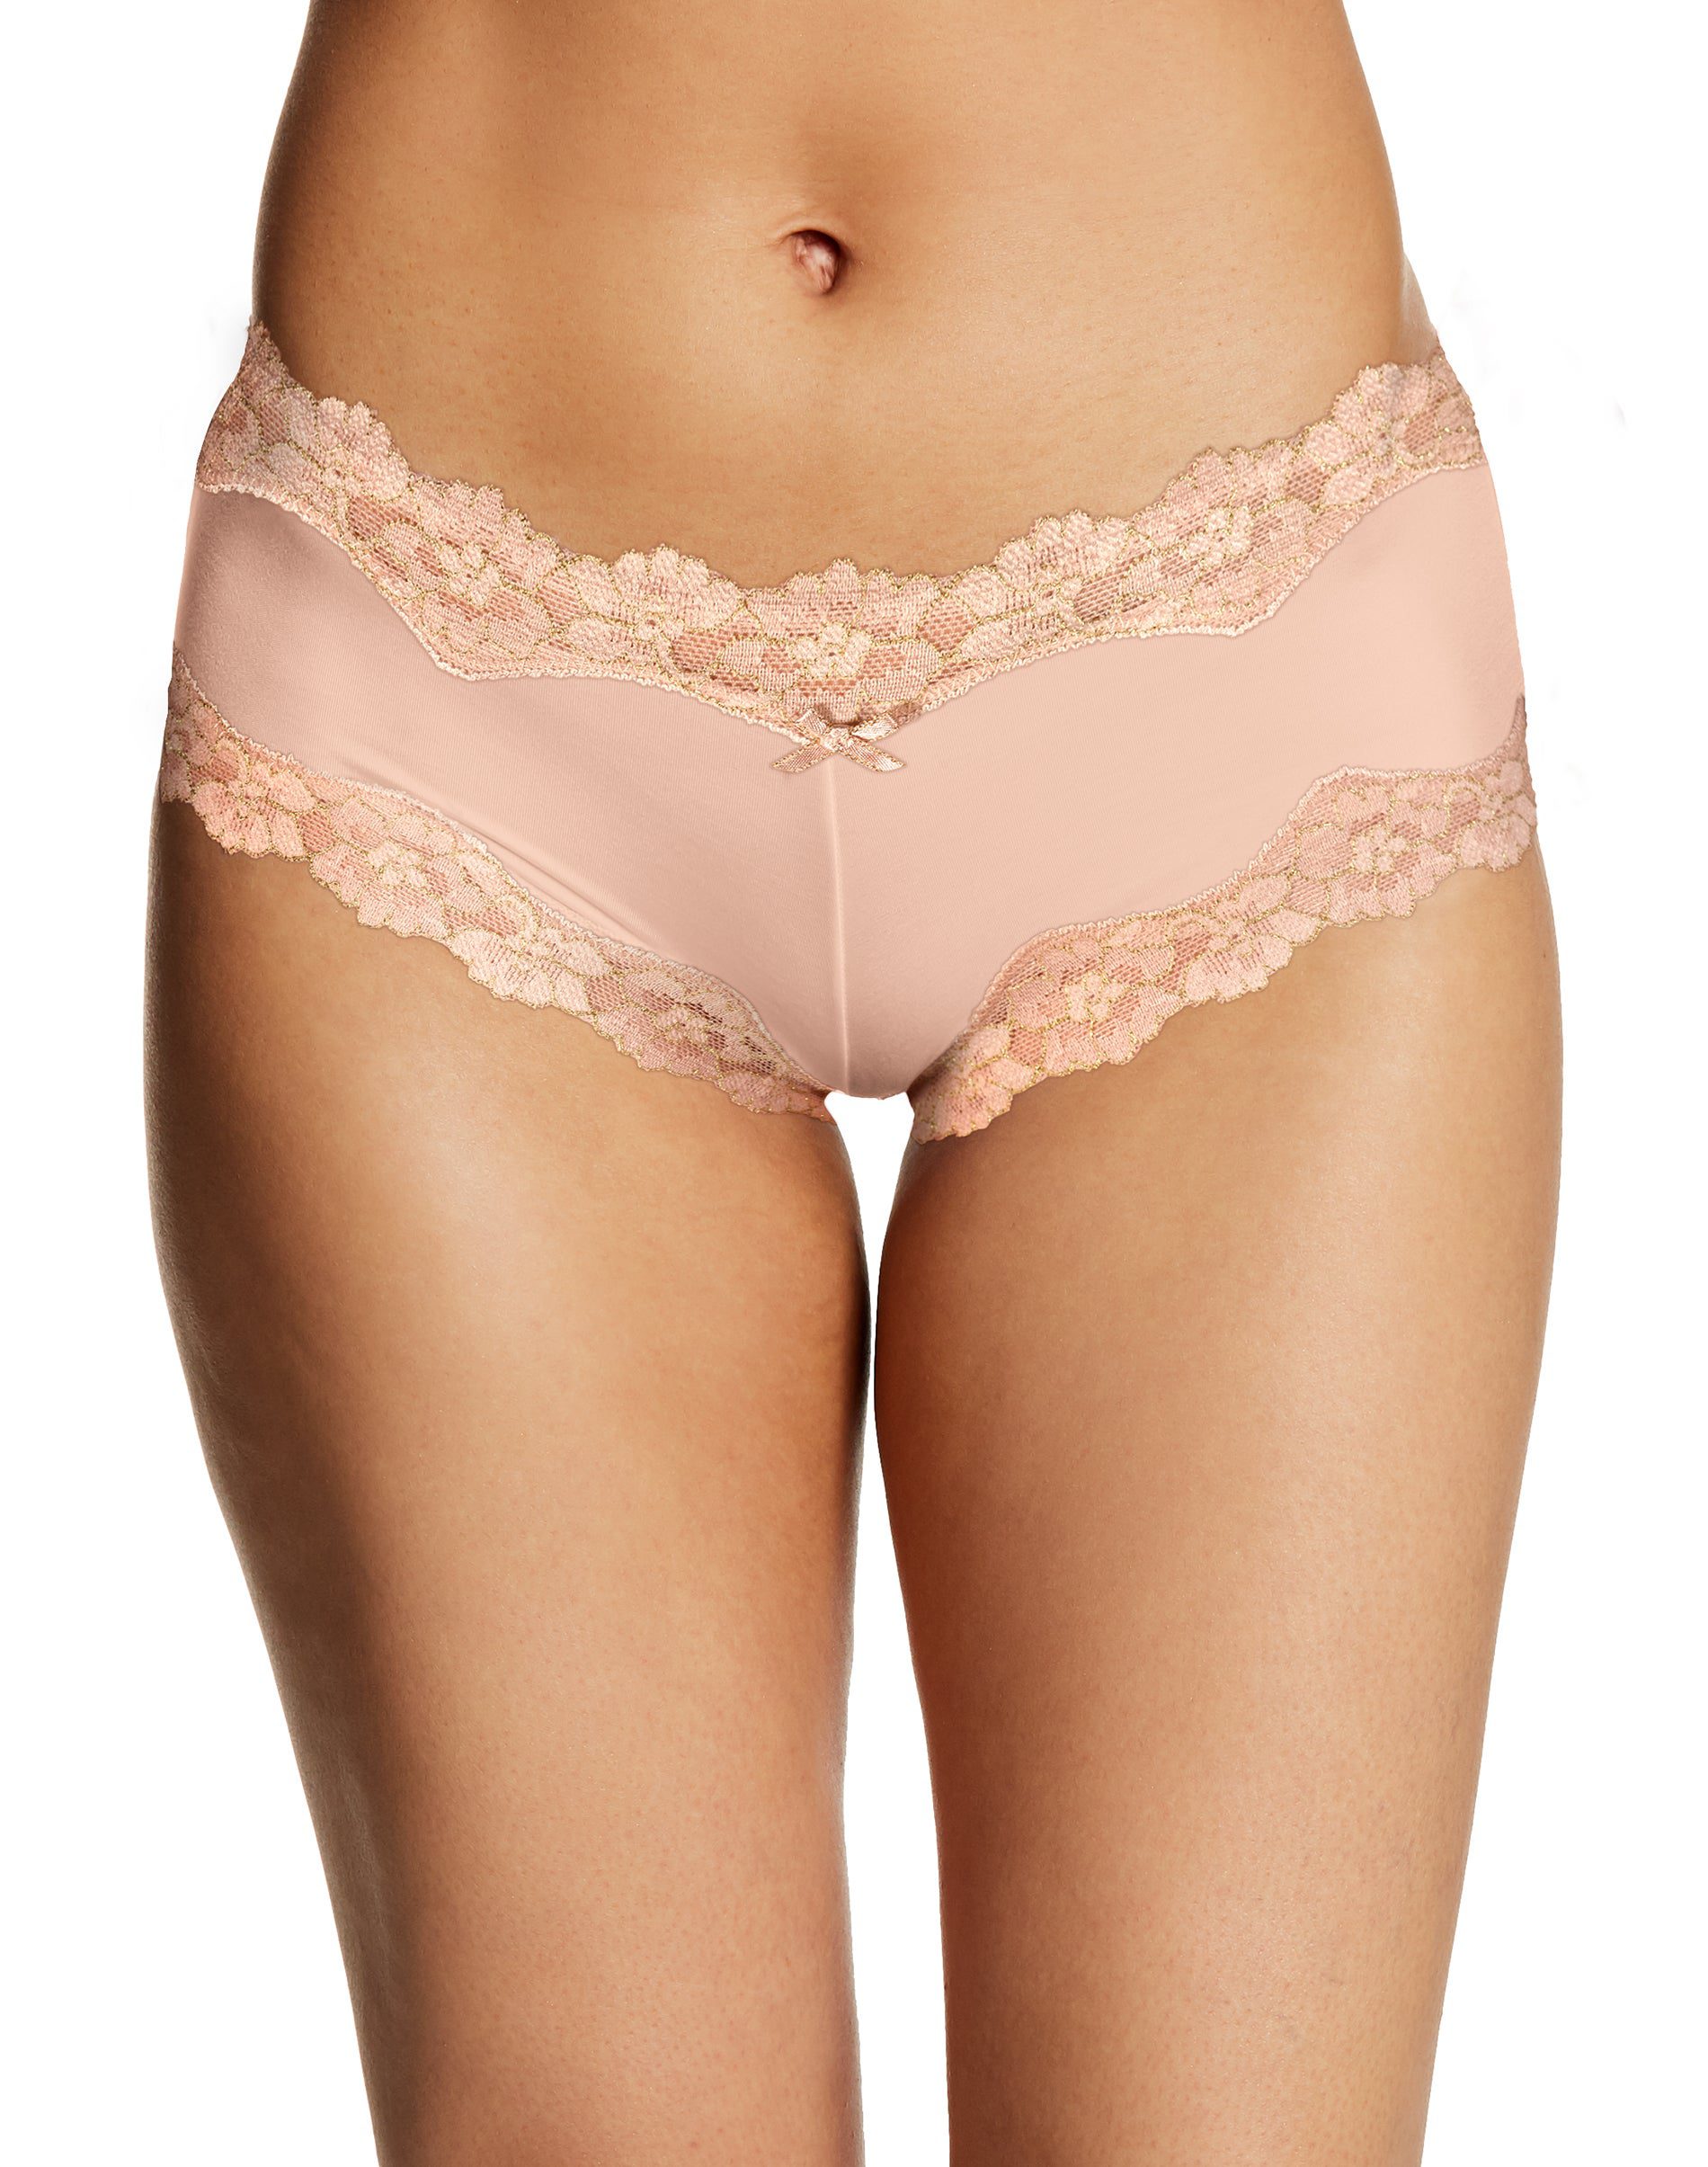  Maidenform Tanga Pack, Back Underwear, Cheeky Lace